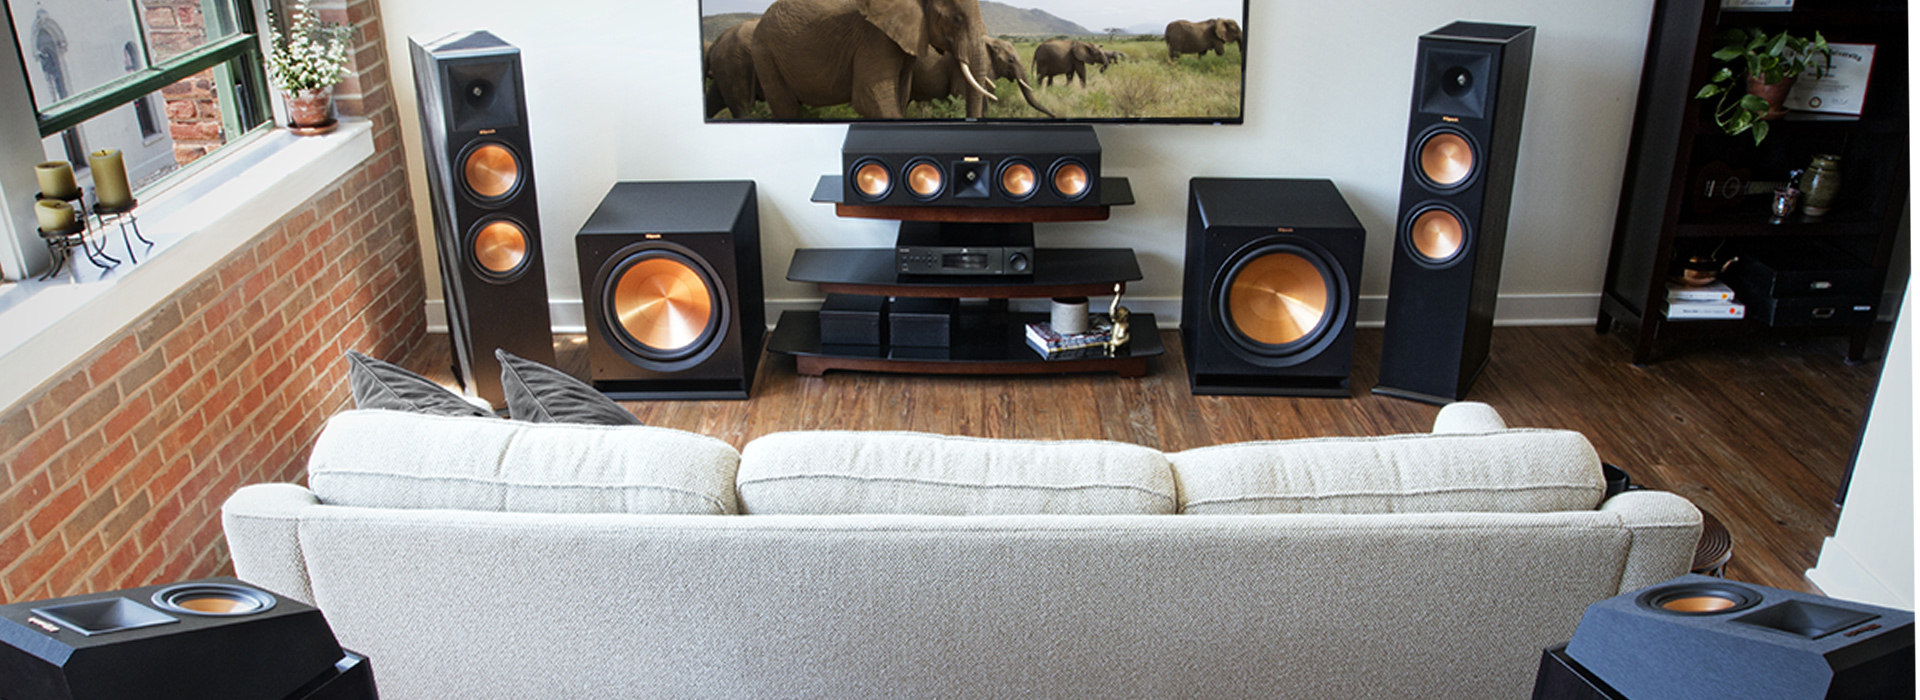 living room surround sound systems